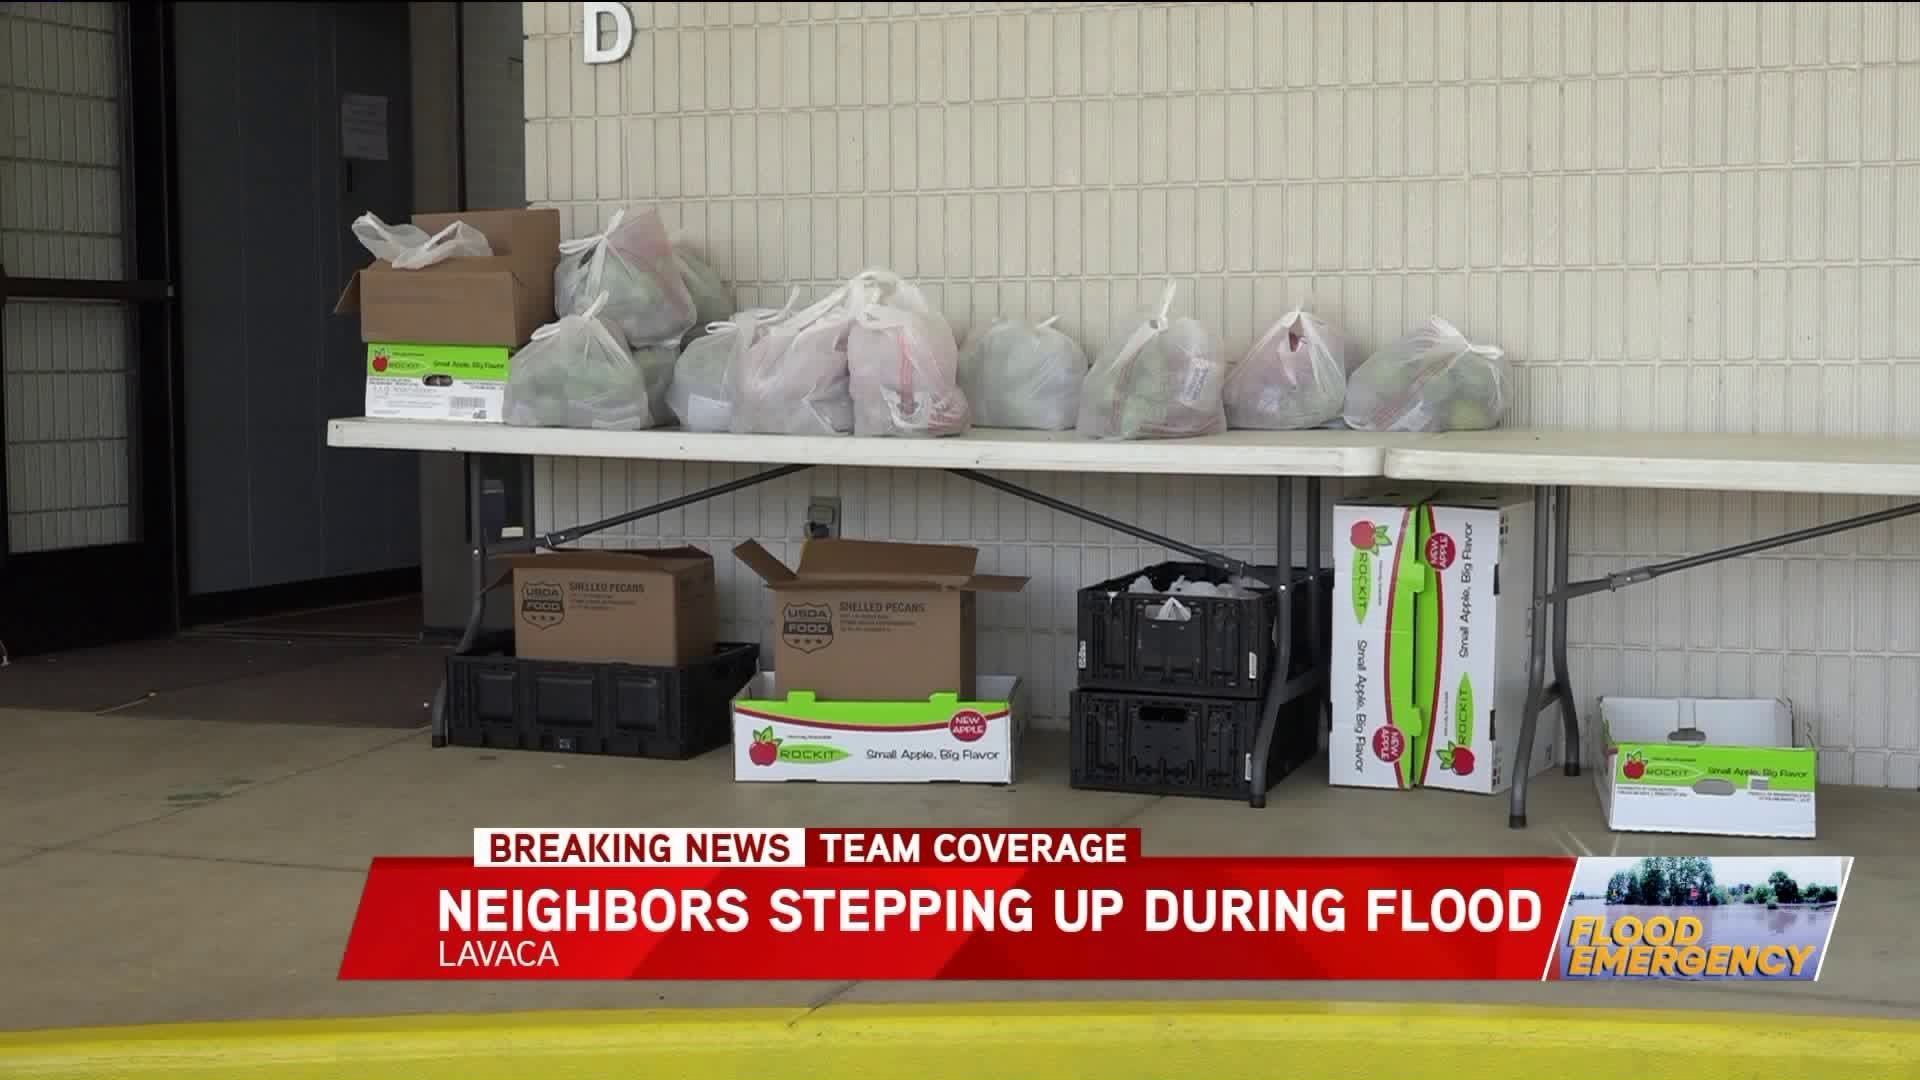 Neighbors Stepping Up During Flooding In Lavaca